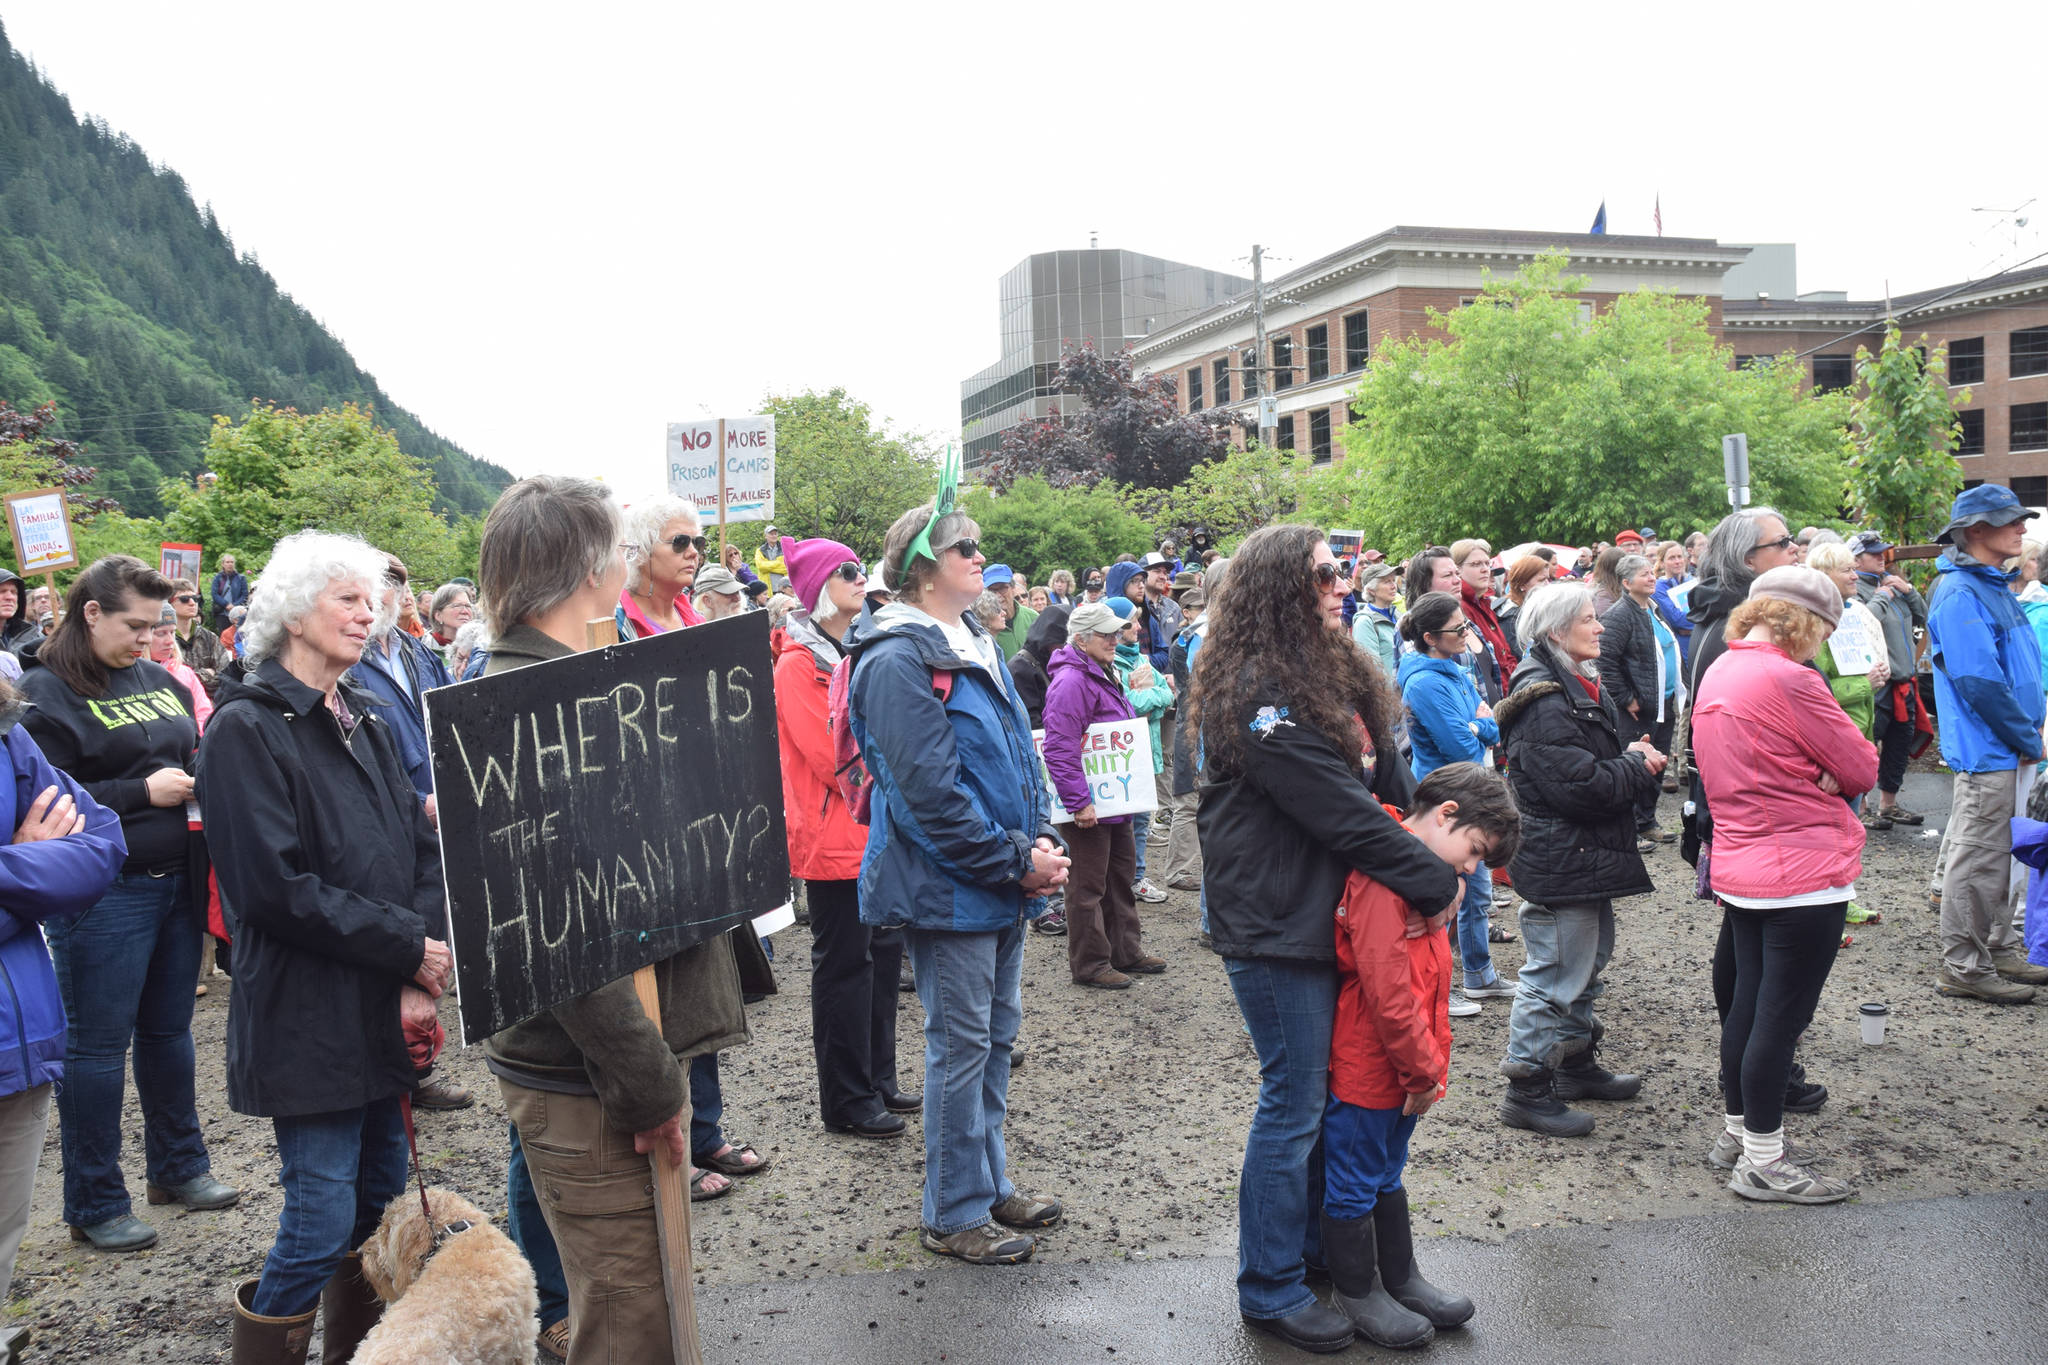 About 400 protesters gathered Saturday for the Families Belong Together Rally at Capital Park to speak out against family separation at the U.S. southern border. (Kevin Gullufsen | Juneau Empire)